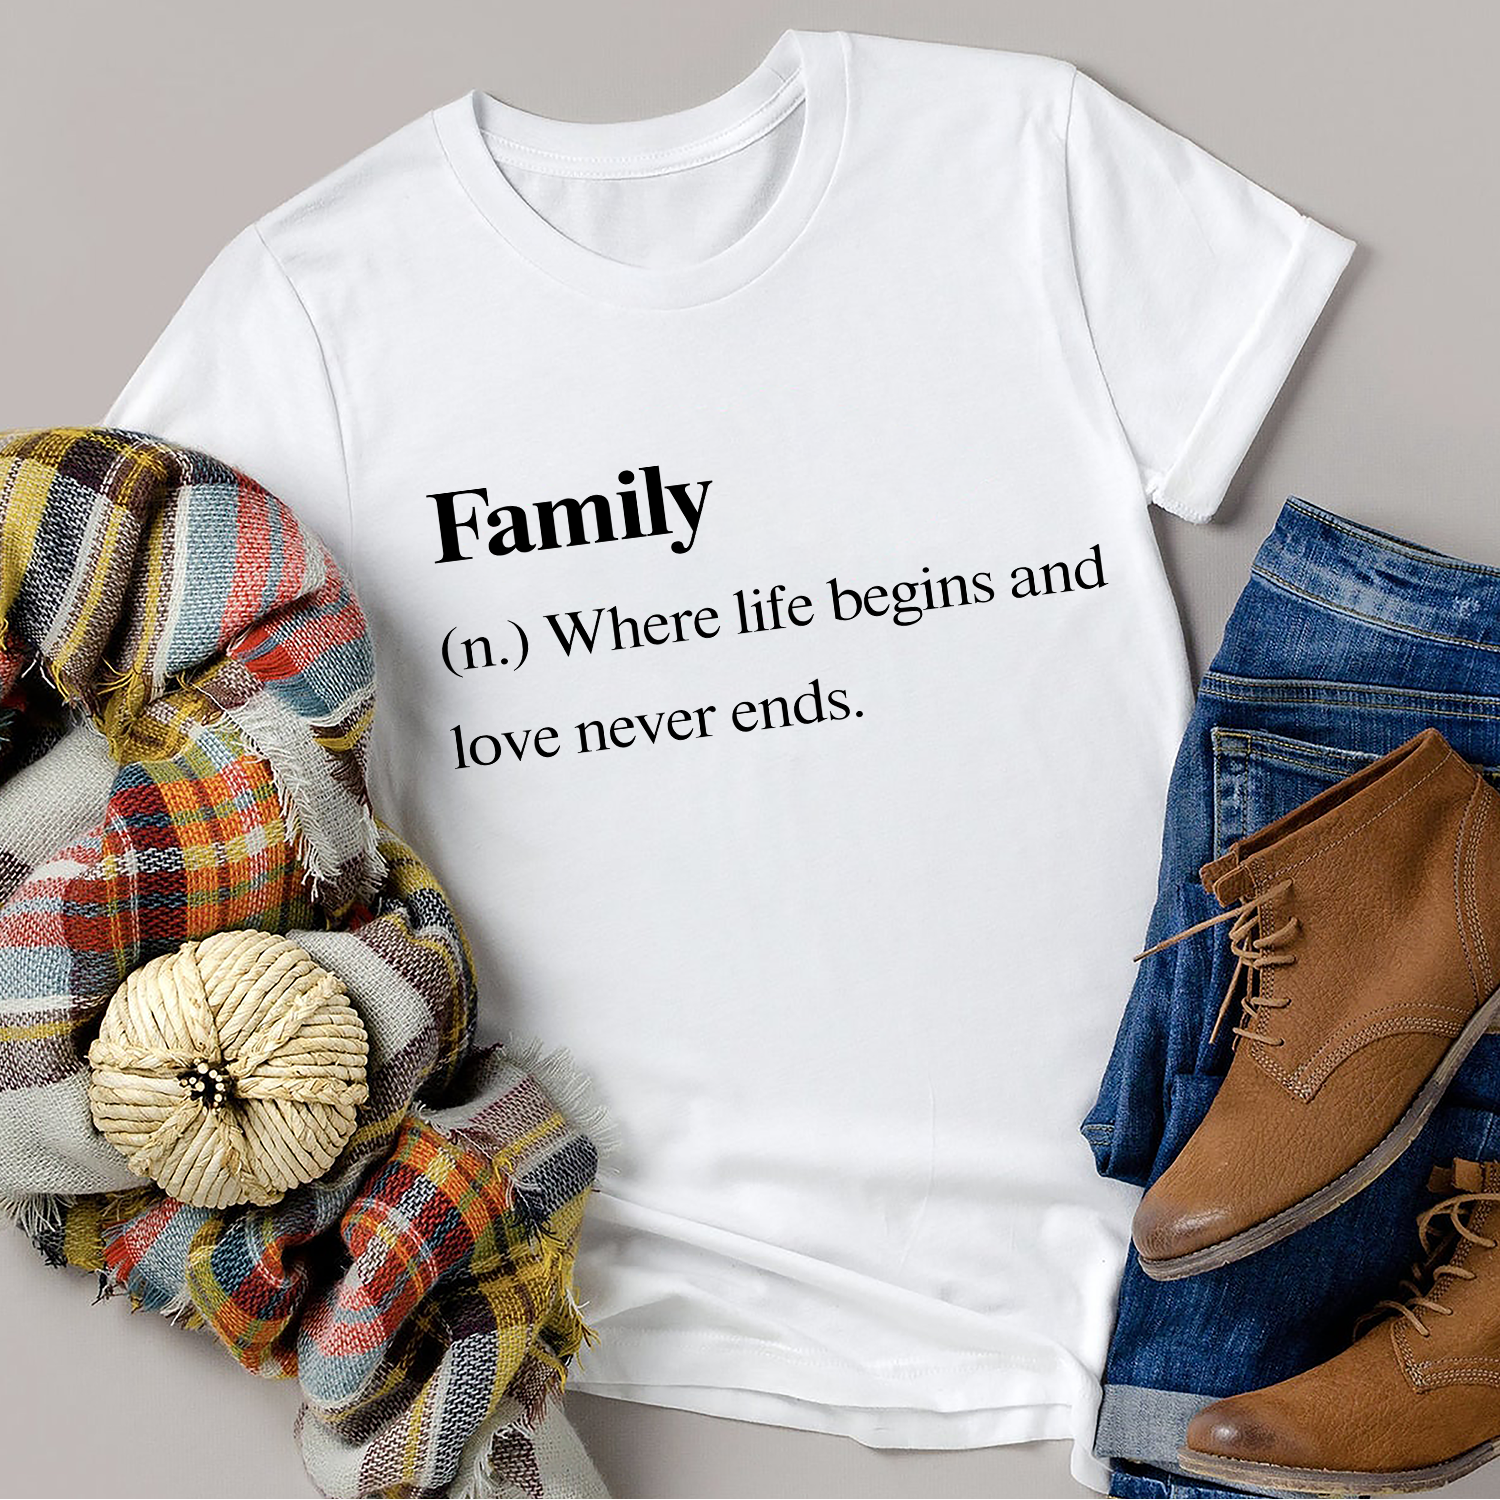 Family Definition T-Shirt Family Where Life Begins And Love Never Ends  Standard T-Shirt